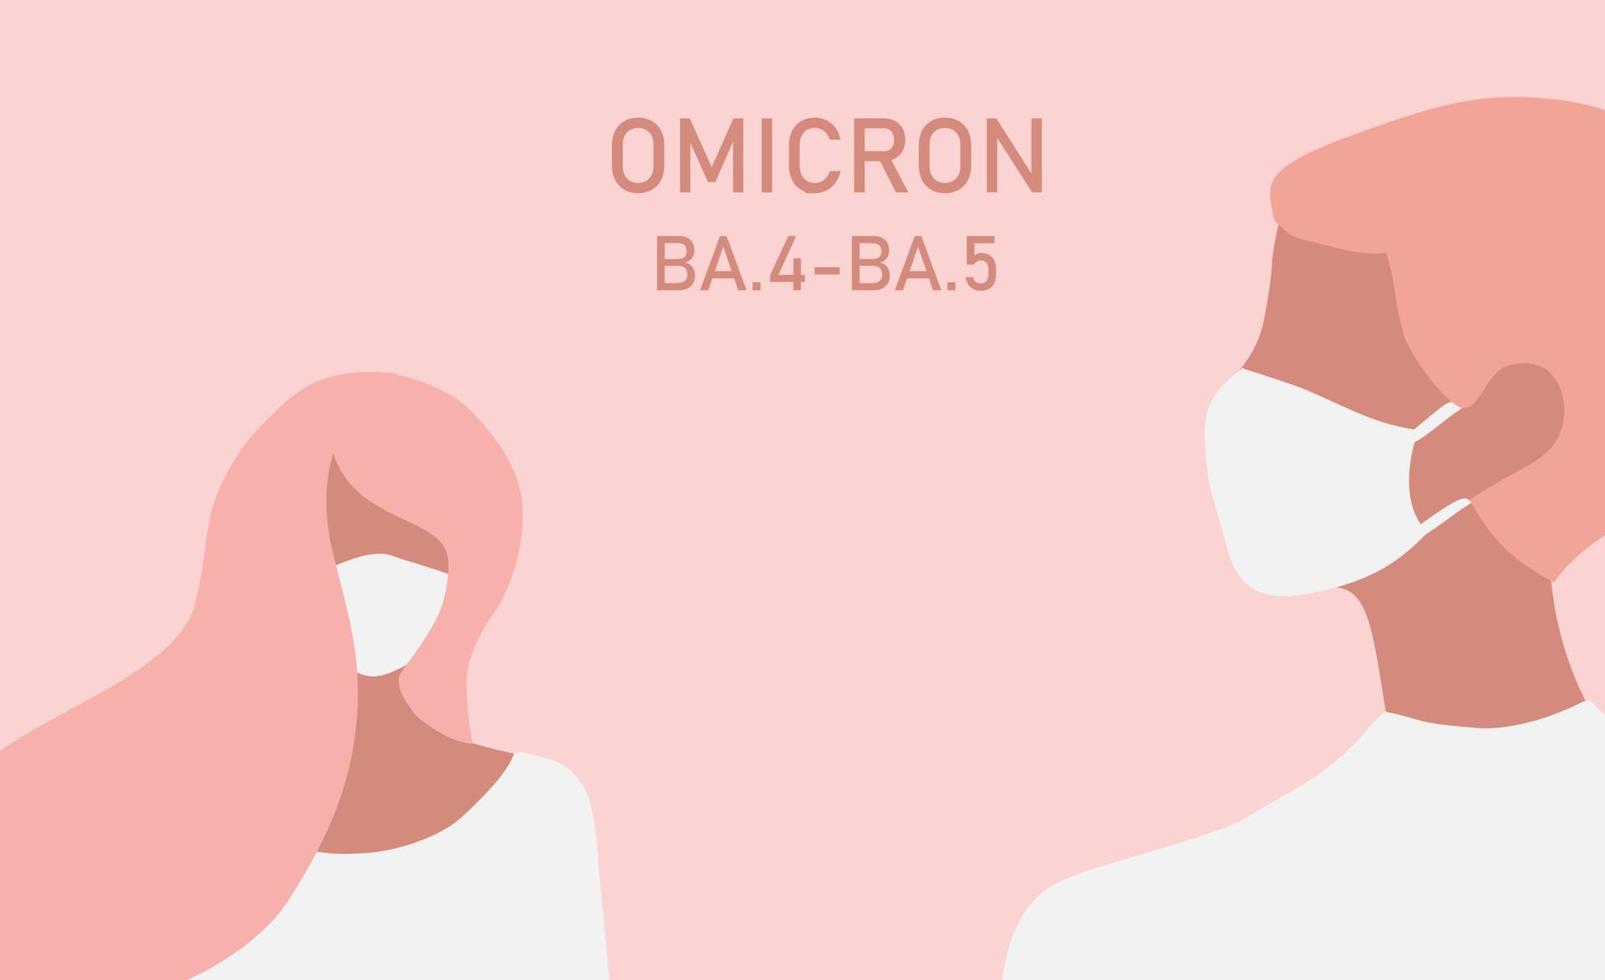 Omicron variant BA.4-BA.5 COVID-19. New strain of coronavirus. Couple with face mask coughing vector illustration